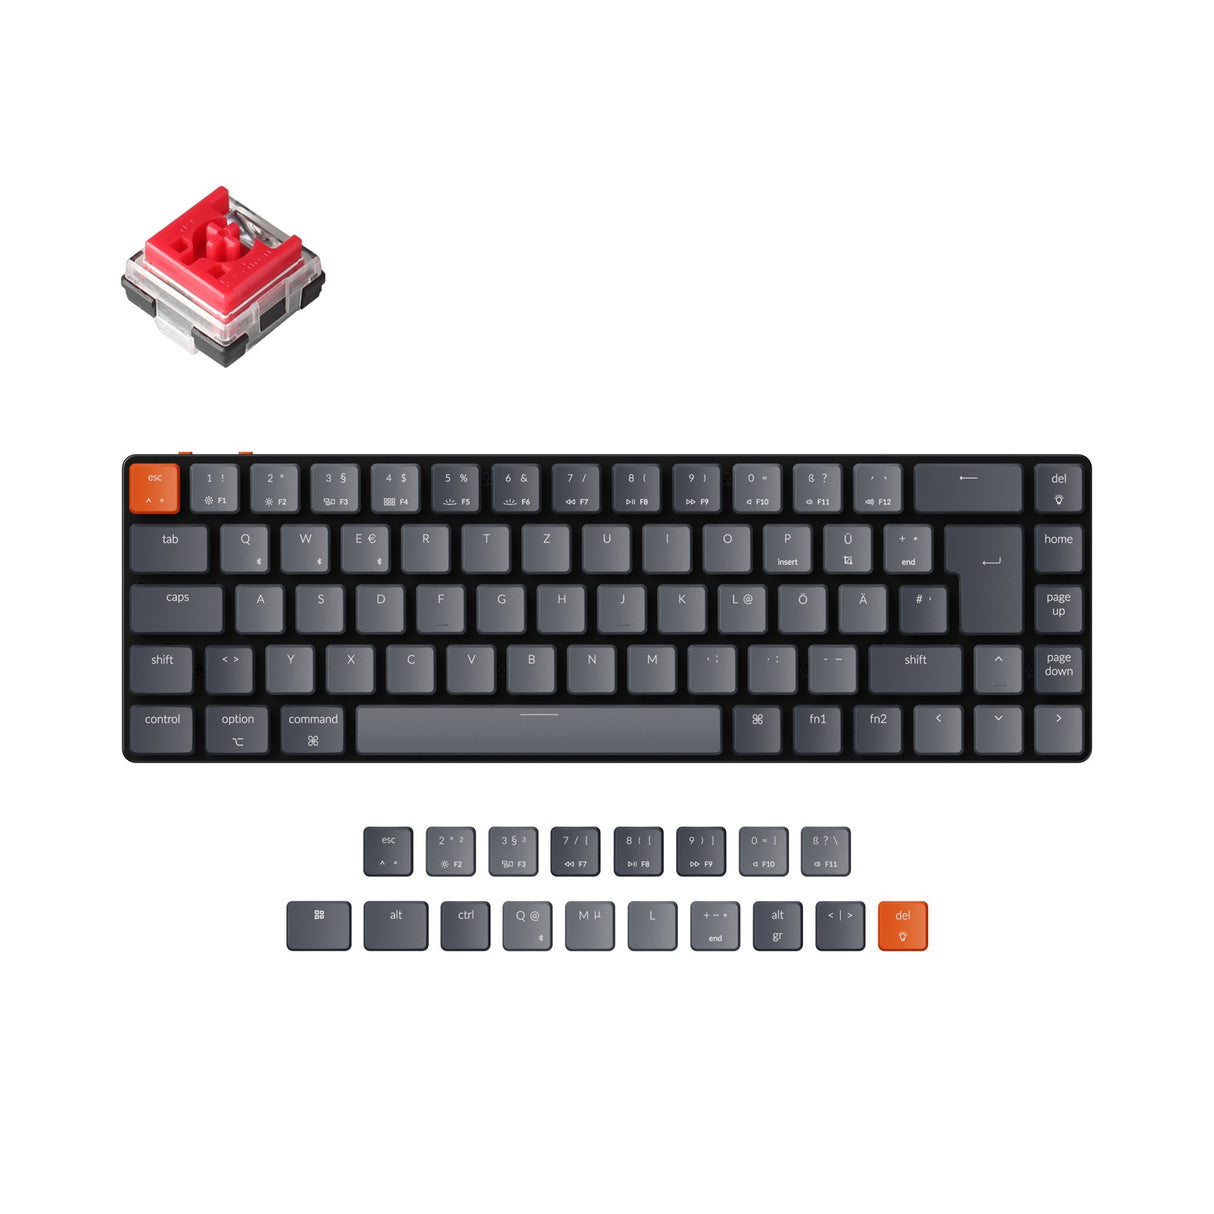 Keychron K7 ultra slim compact wireless mechanical keyboard for Mac Windows low profile Optical red switch white backlight German ISO DE layout